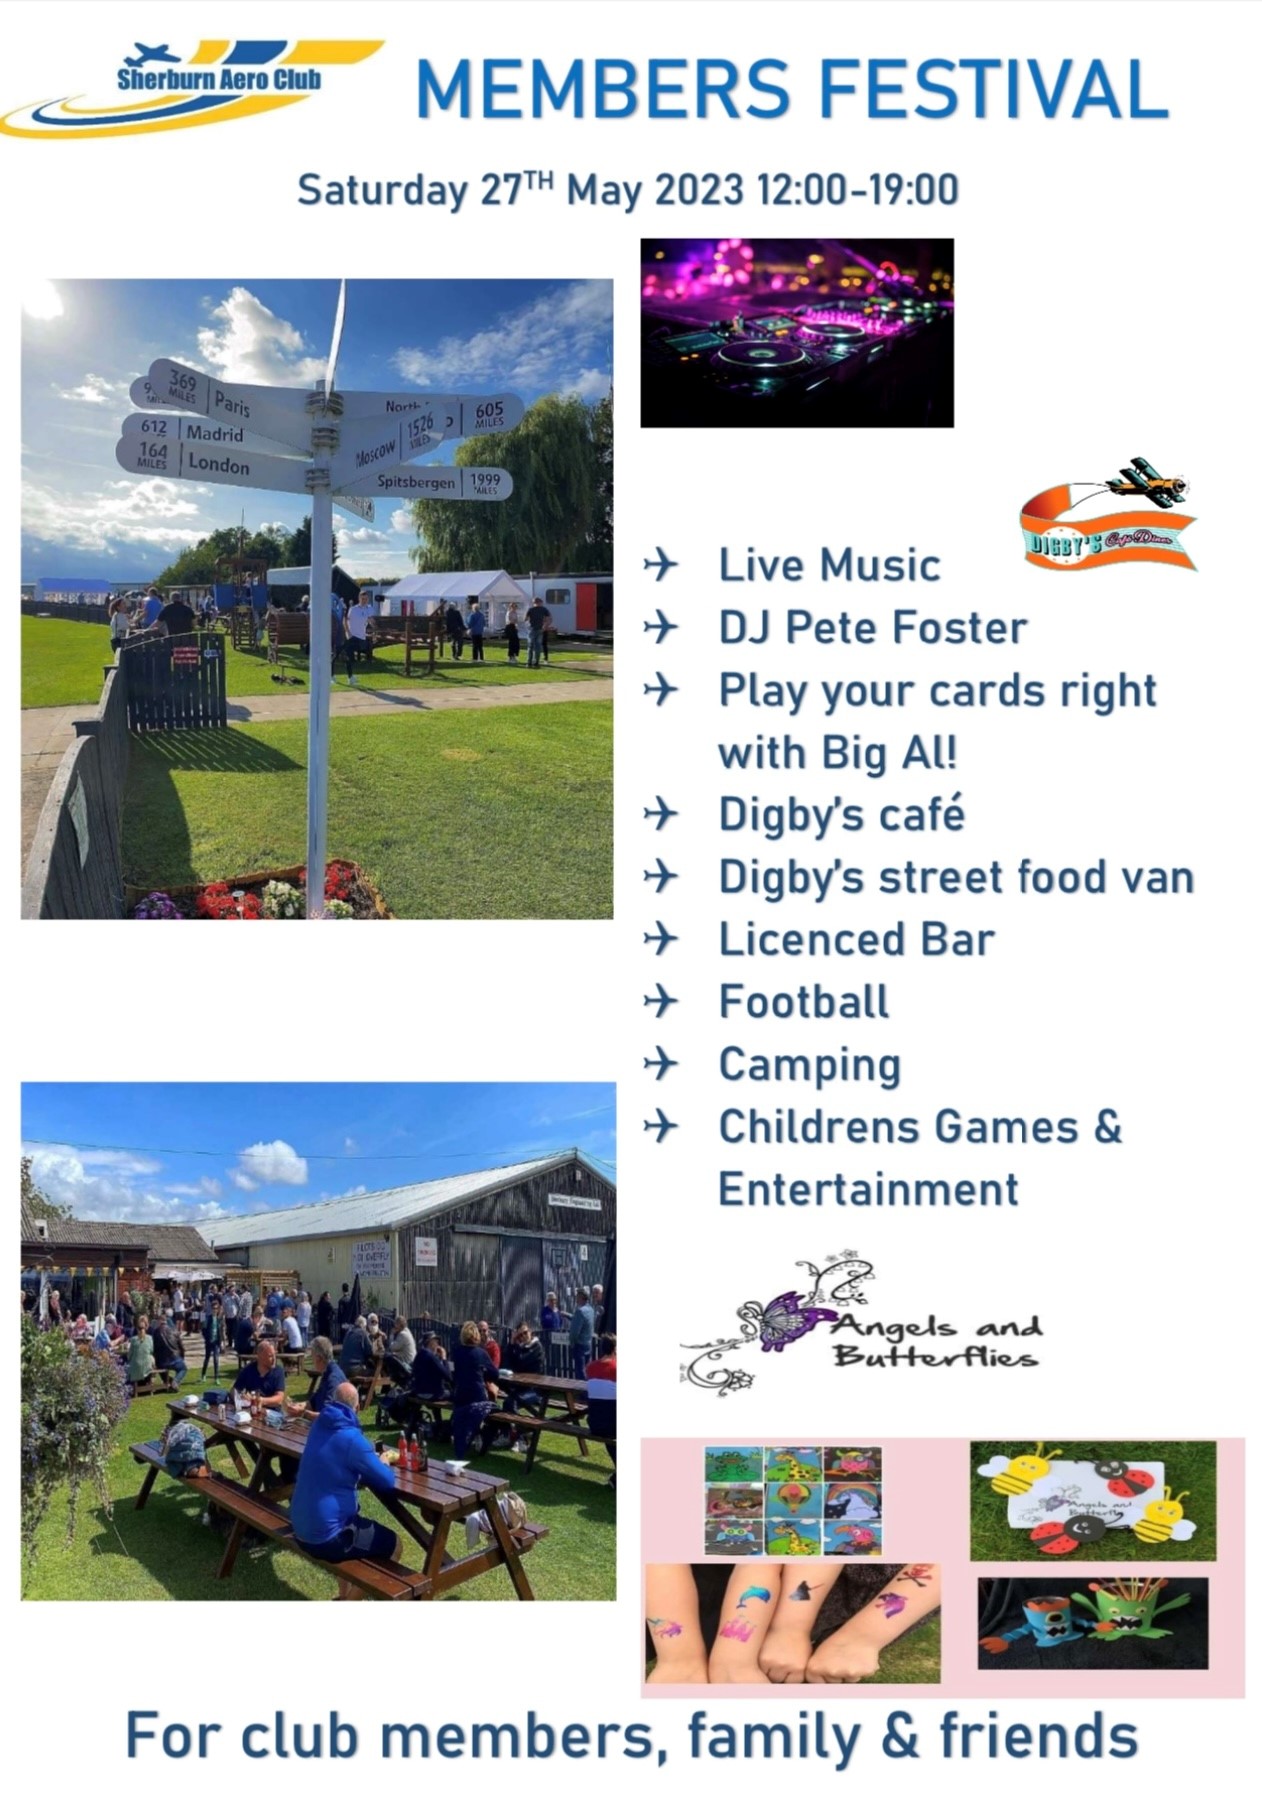 Members Event
Live music
Play your cards right with Big Al!
Digby's cafe
Digby's street food van
Licenced bar
Football
Camping
Children's games and entertainment